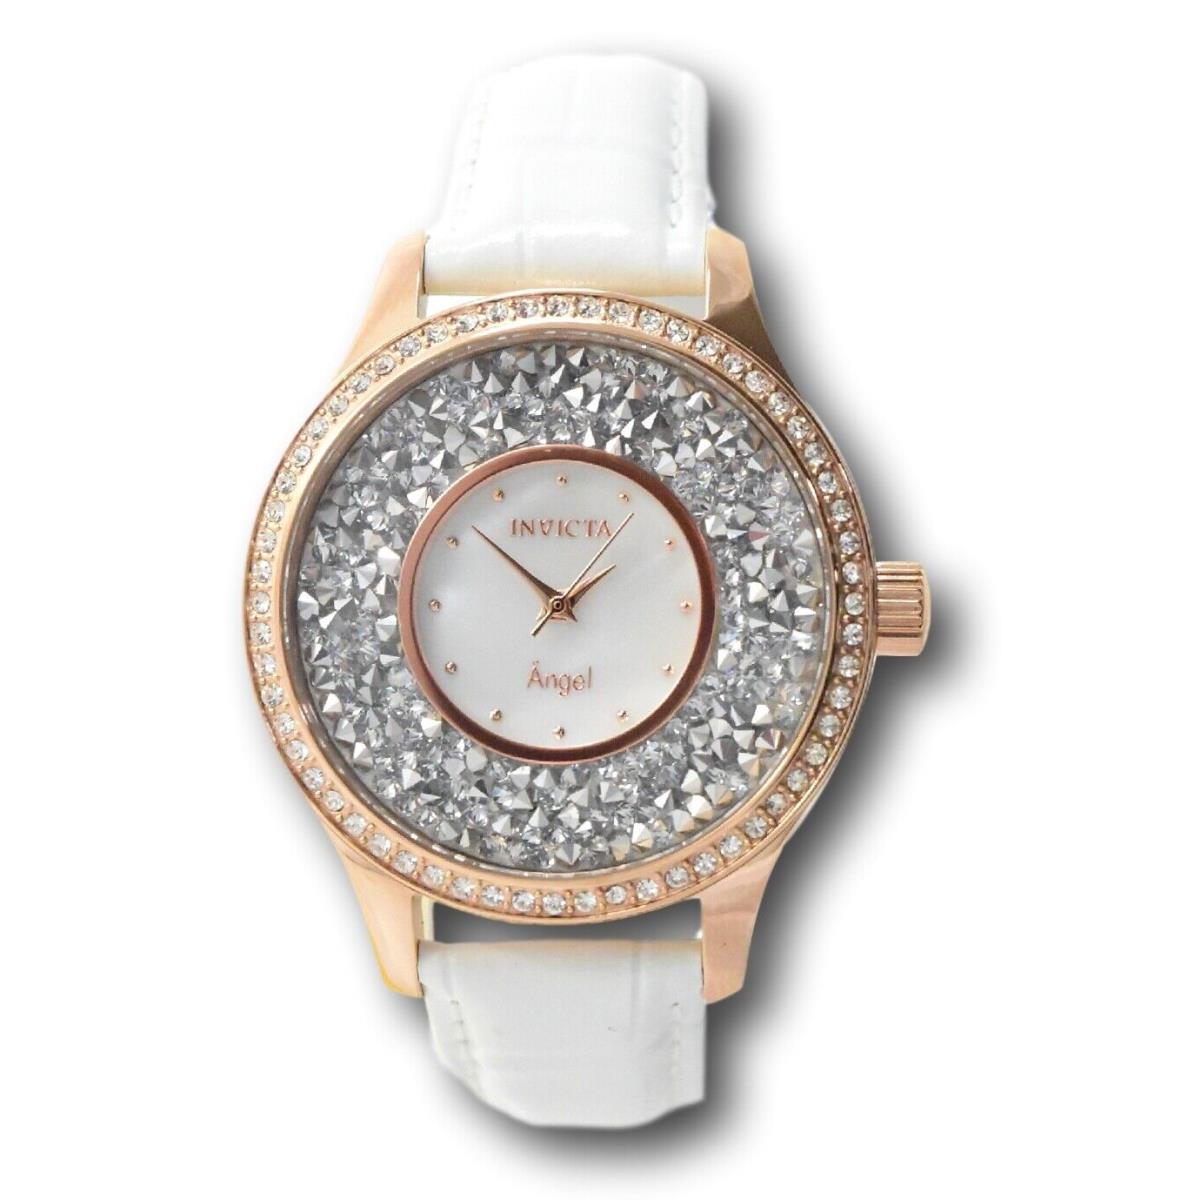 Invicta Angel Women`s 40mm Rose Gold Crystal Sparkle White Leather Watch 24588 - Dial: White, Band: White, Manufacturer Band: White